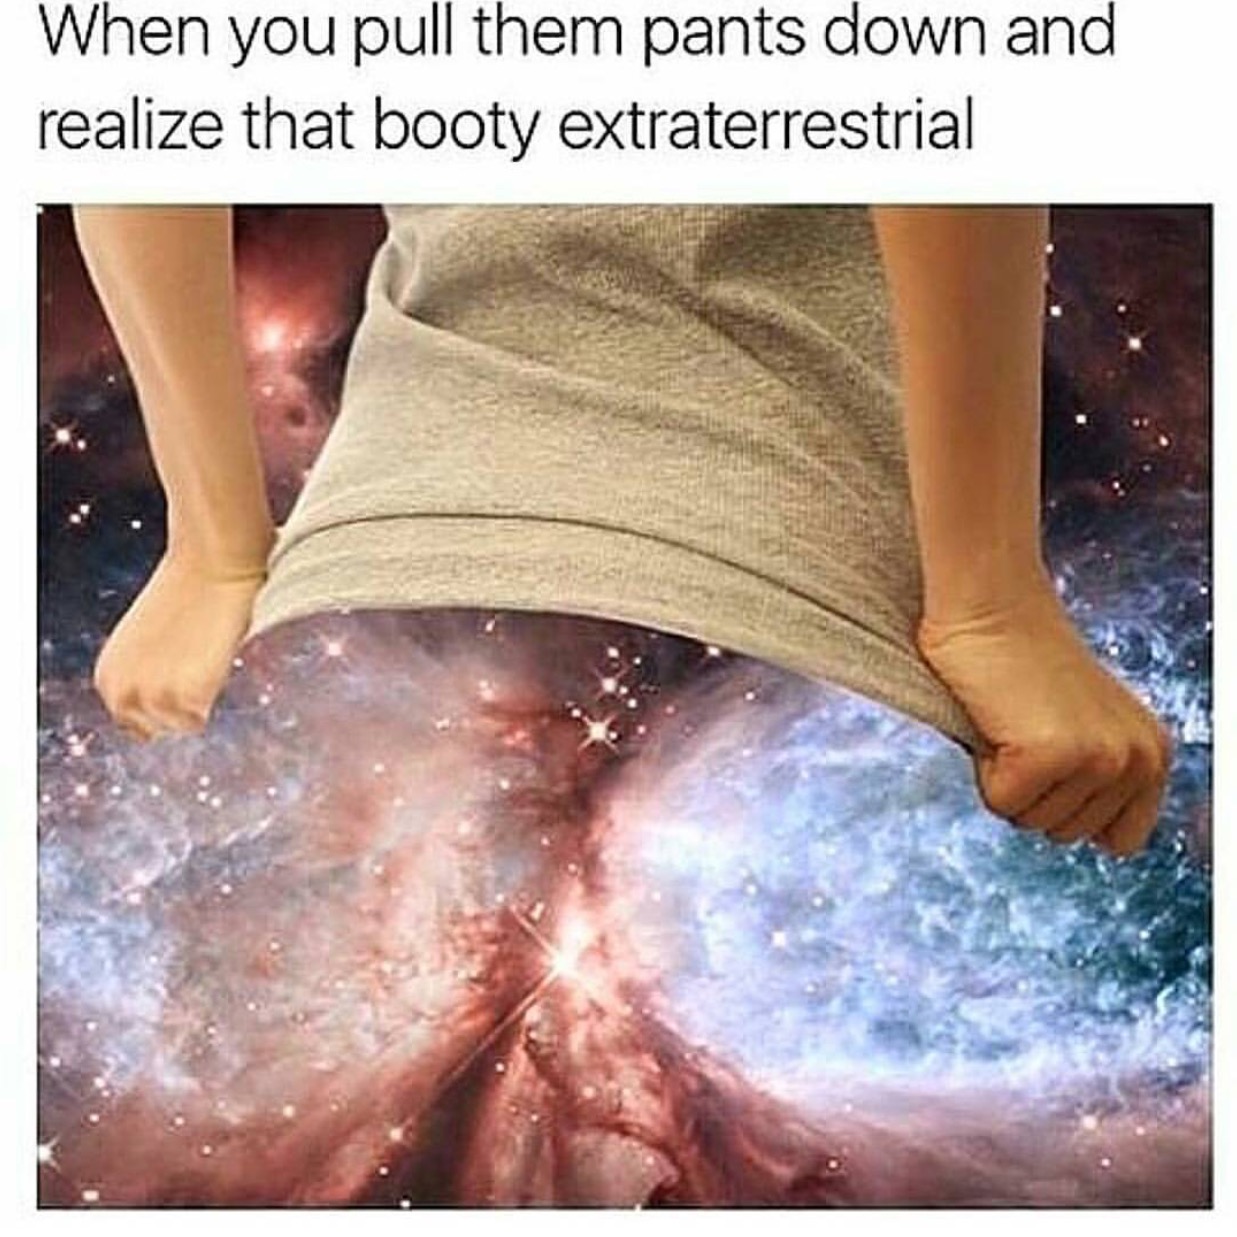 you pull them pants down and realize - When you pull them pants down and realize that booty extraterrestrial